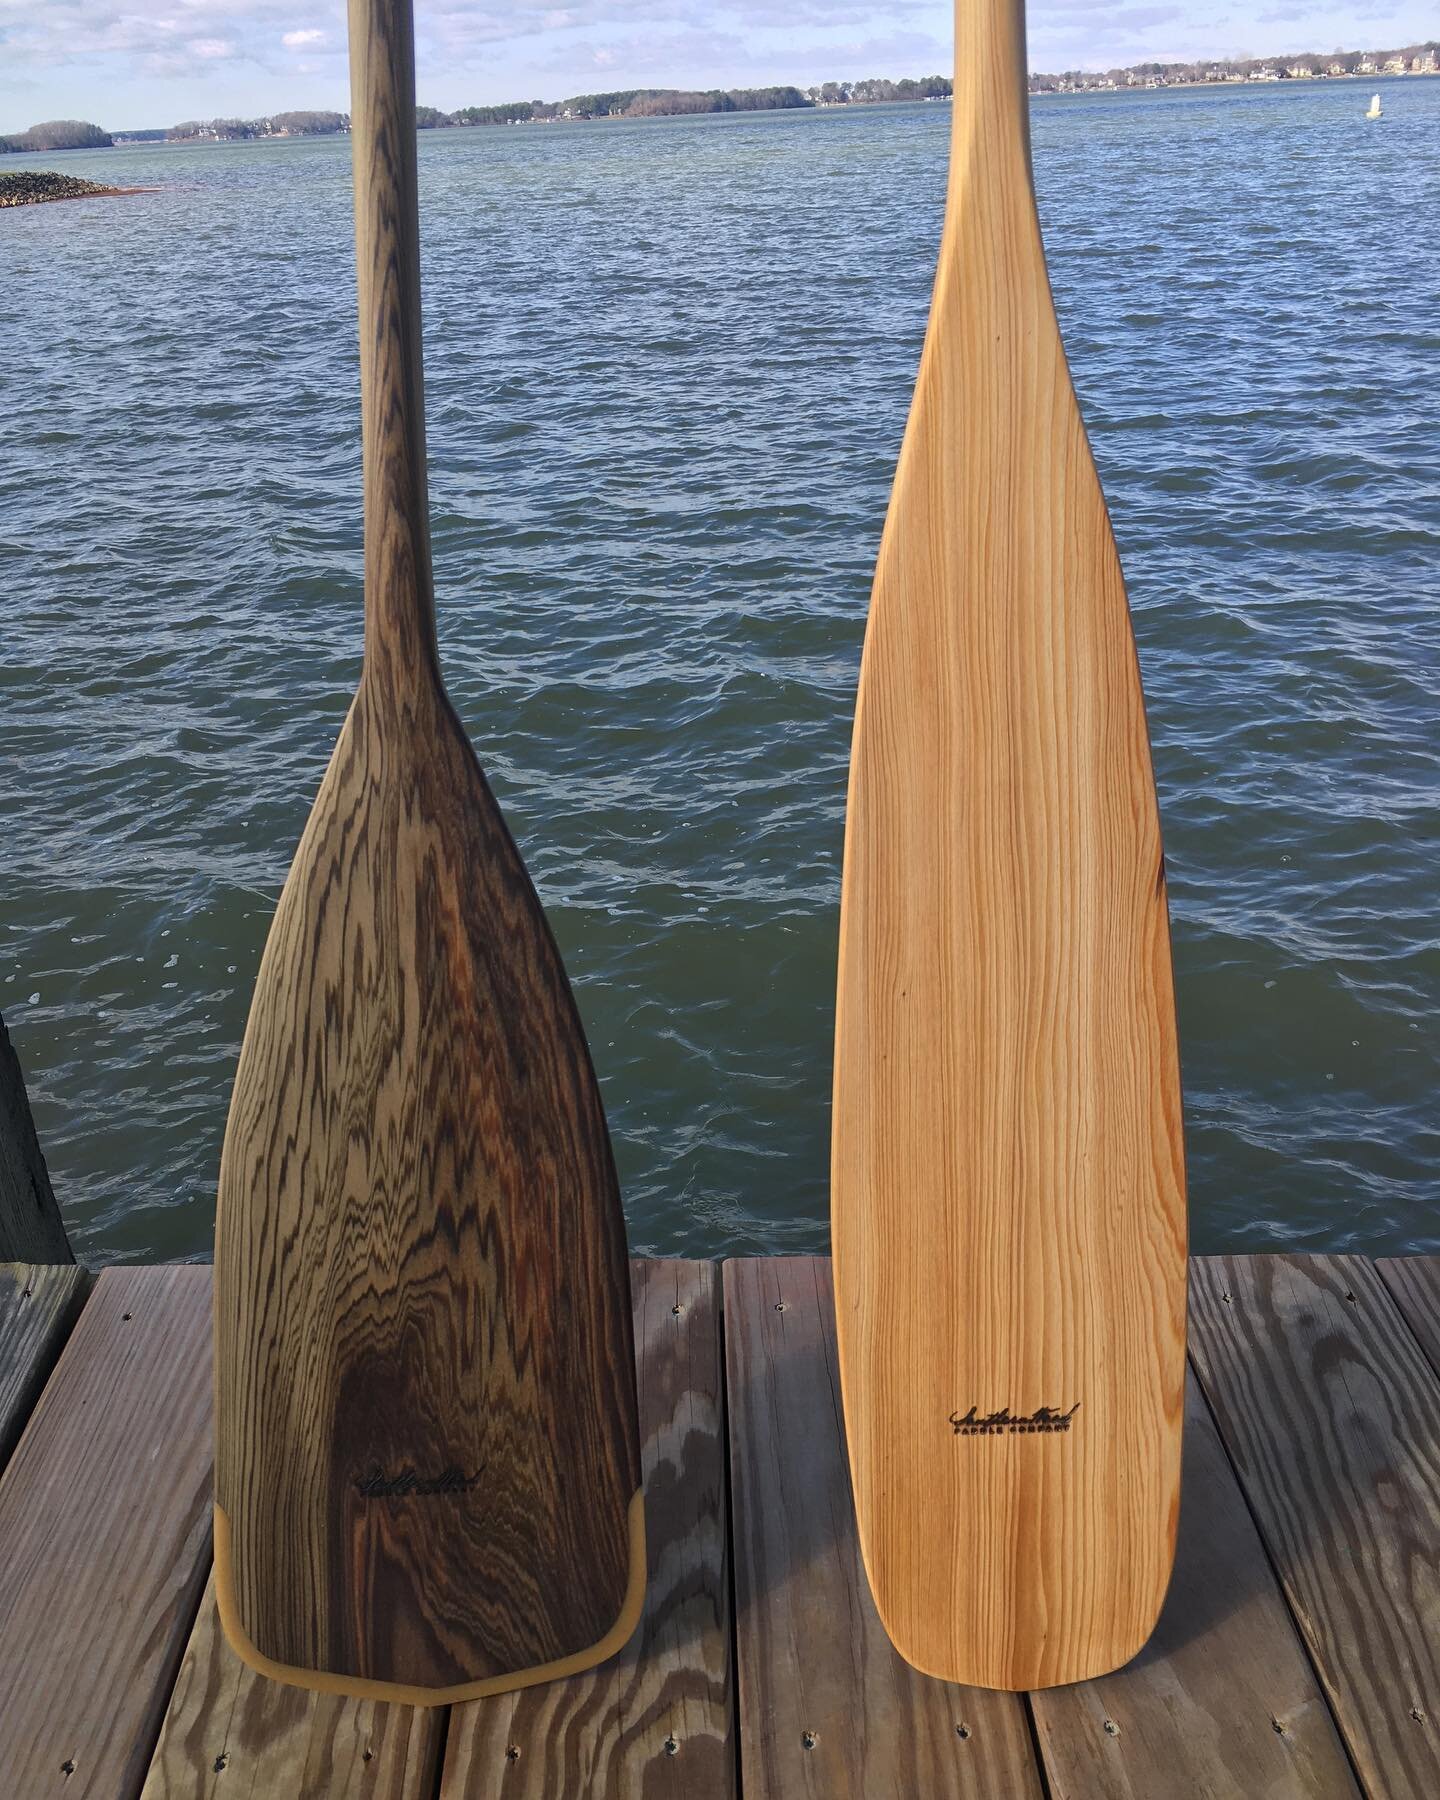 This is a great example of how much the color can vary in sinker cypress.  Tannins in the water and muddy vs sandy river bottoms all effect the final look. As is often the case, we are at Mother Nature&rsquo;s mercy when it comes to the color of wood